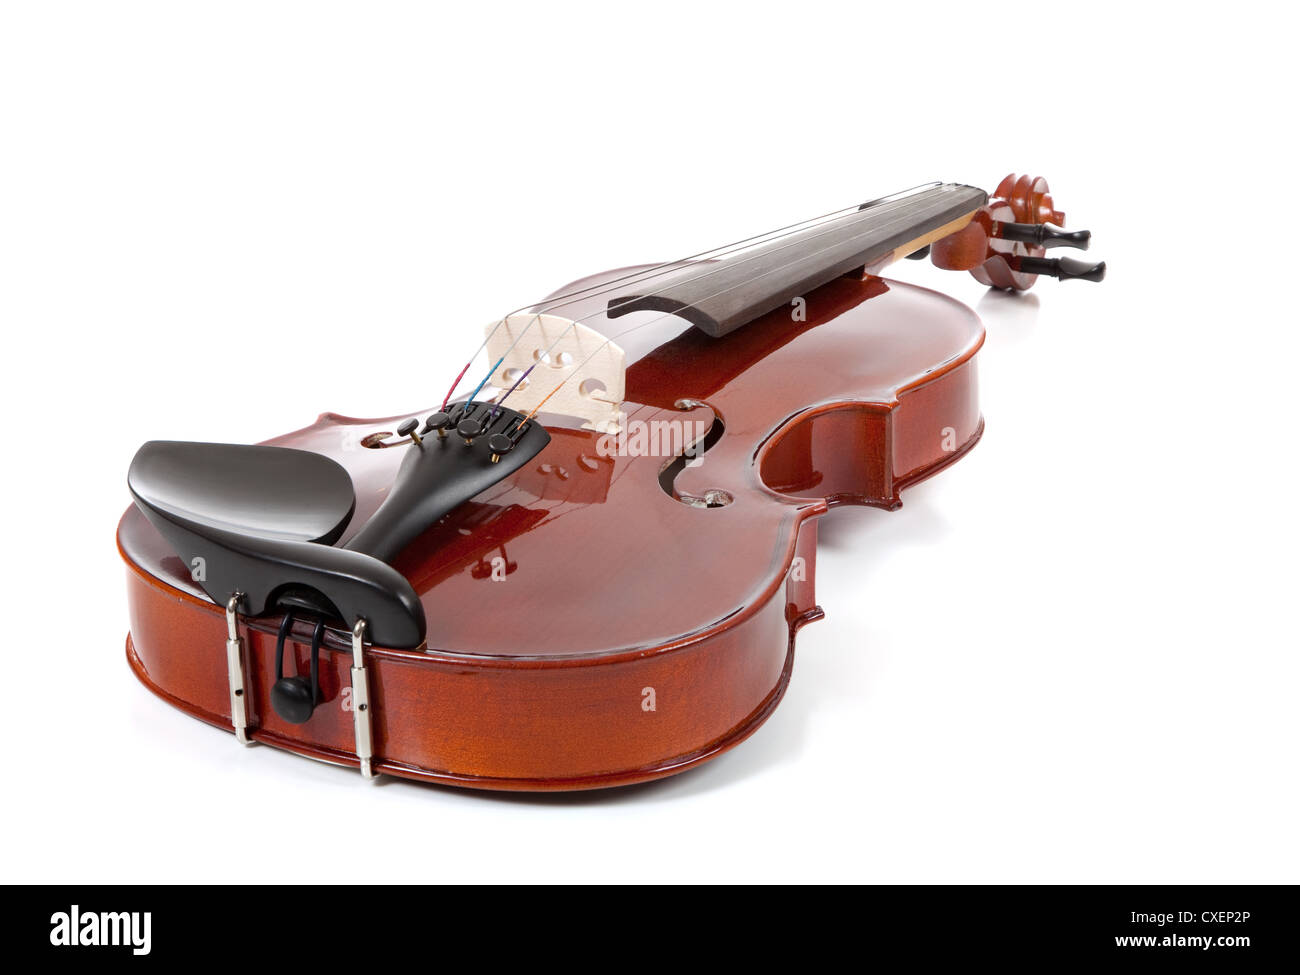 A violin with an extended depth of field on a white background Stock Photo